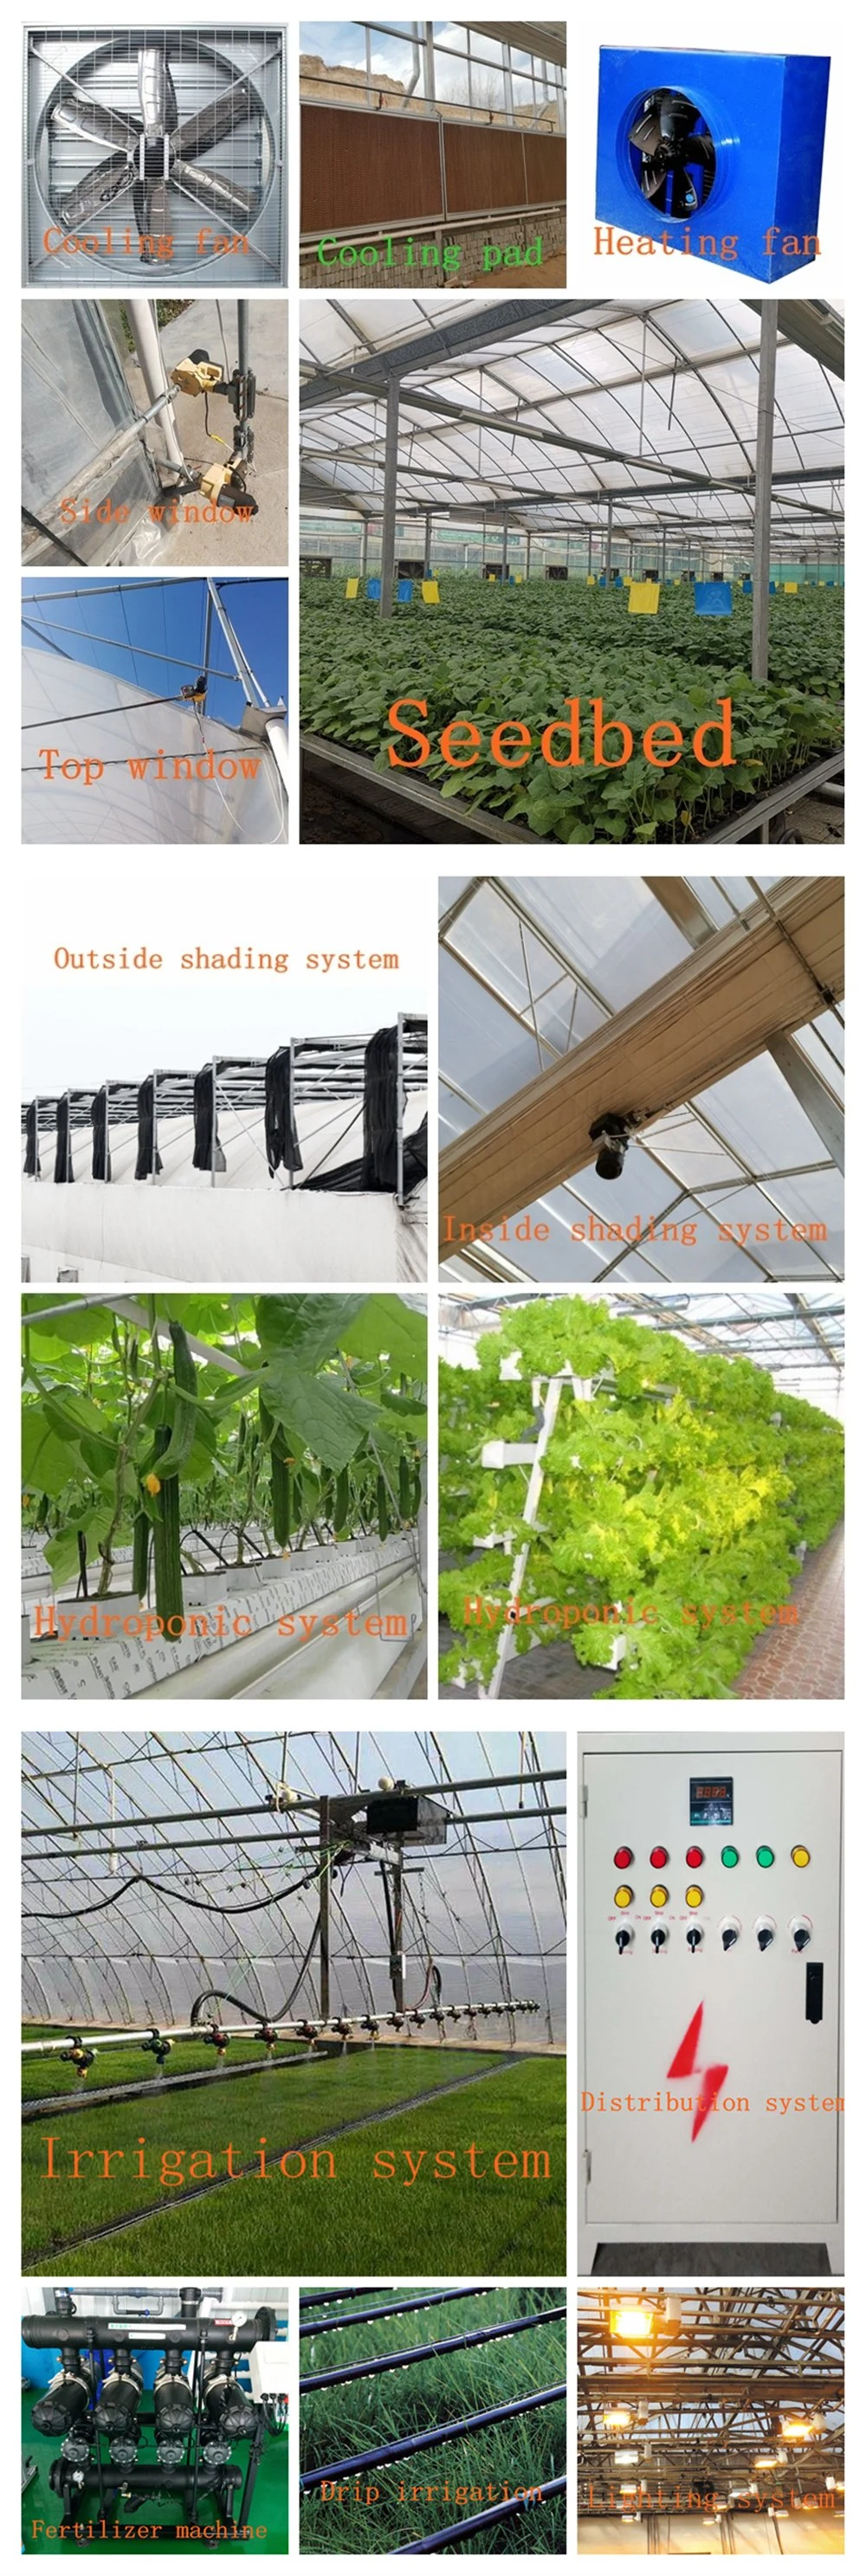 Multi-Span/Single-Span Plastic Film Greenhouse Hydroponics for Tomatoes/Cucumber/Peppers